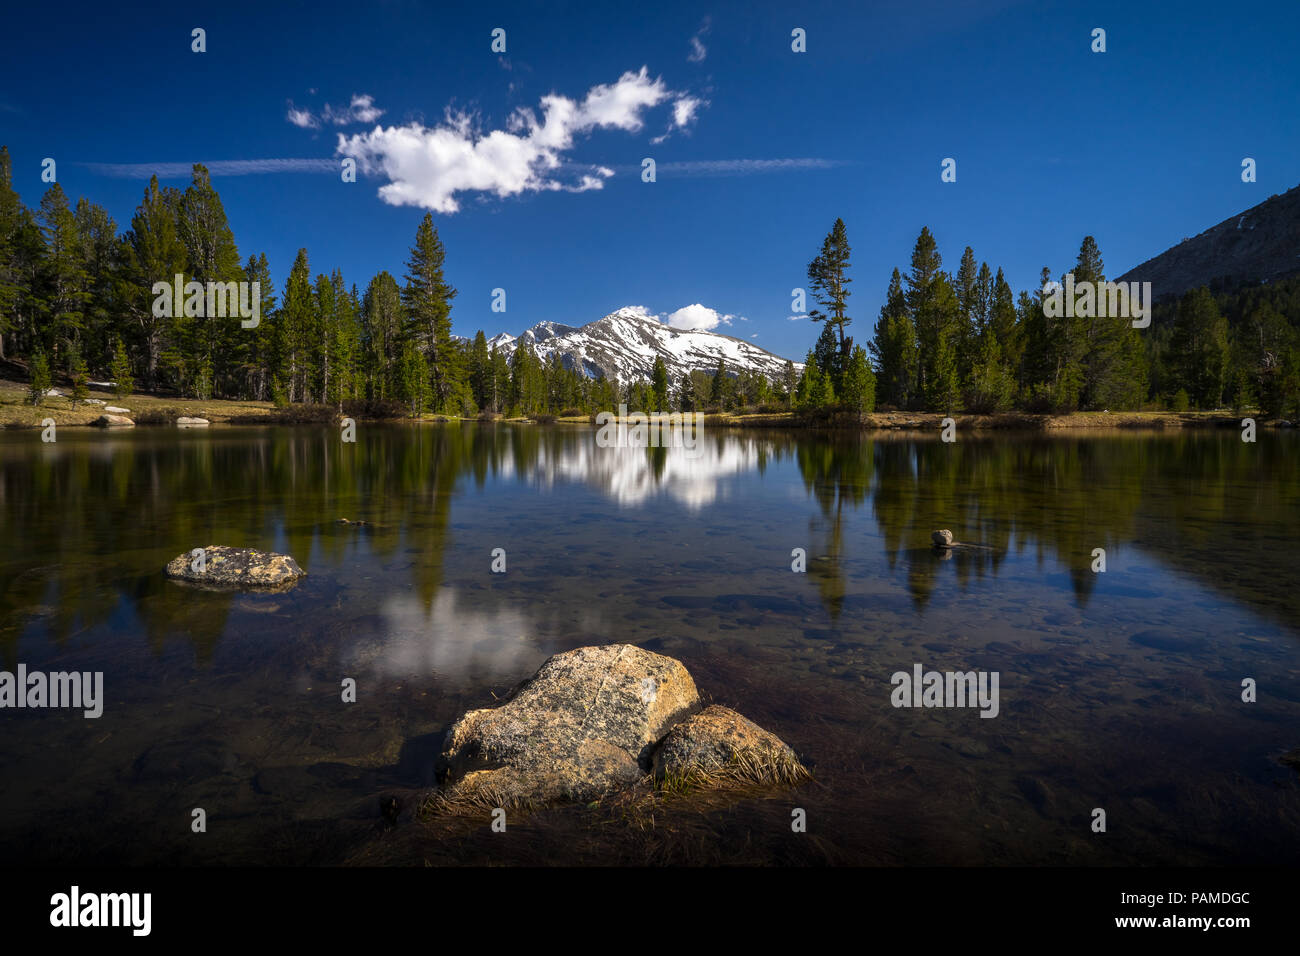 Alpine lake landscape from springtime snowmelt, with reflection of Snowy Mammoth Peak in Distance - Yosemite National Parkm Stock Photo